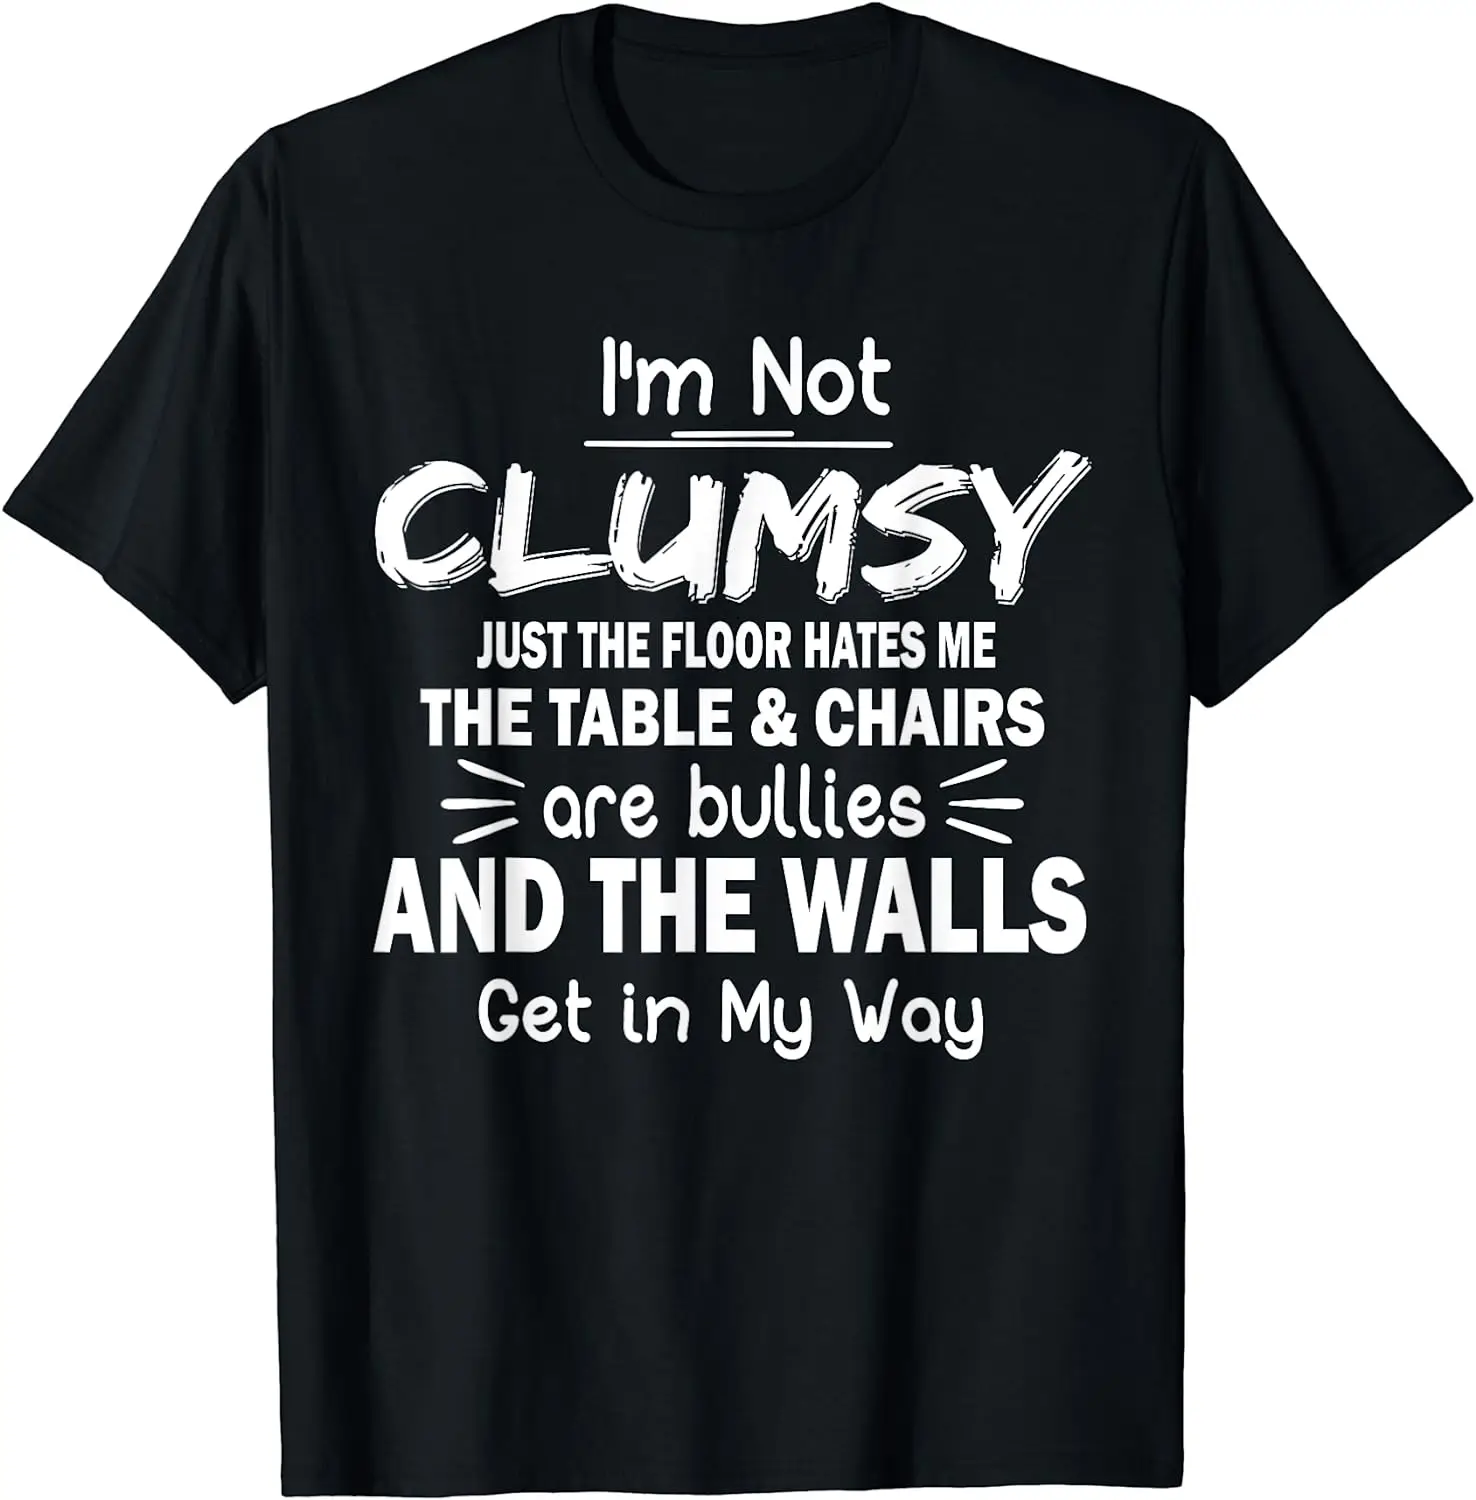 

I'm Not Clumsy Funny Sayings Sarcastic Men Women Boys Girls T-Shirt Casual Cotton Daily Four Seasons Tees Streetwear